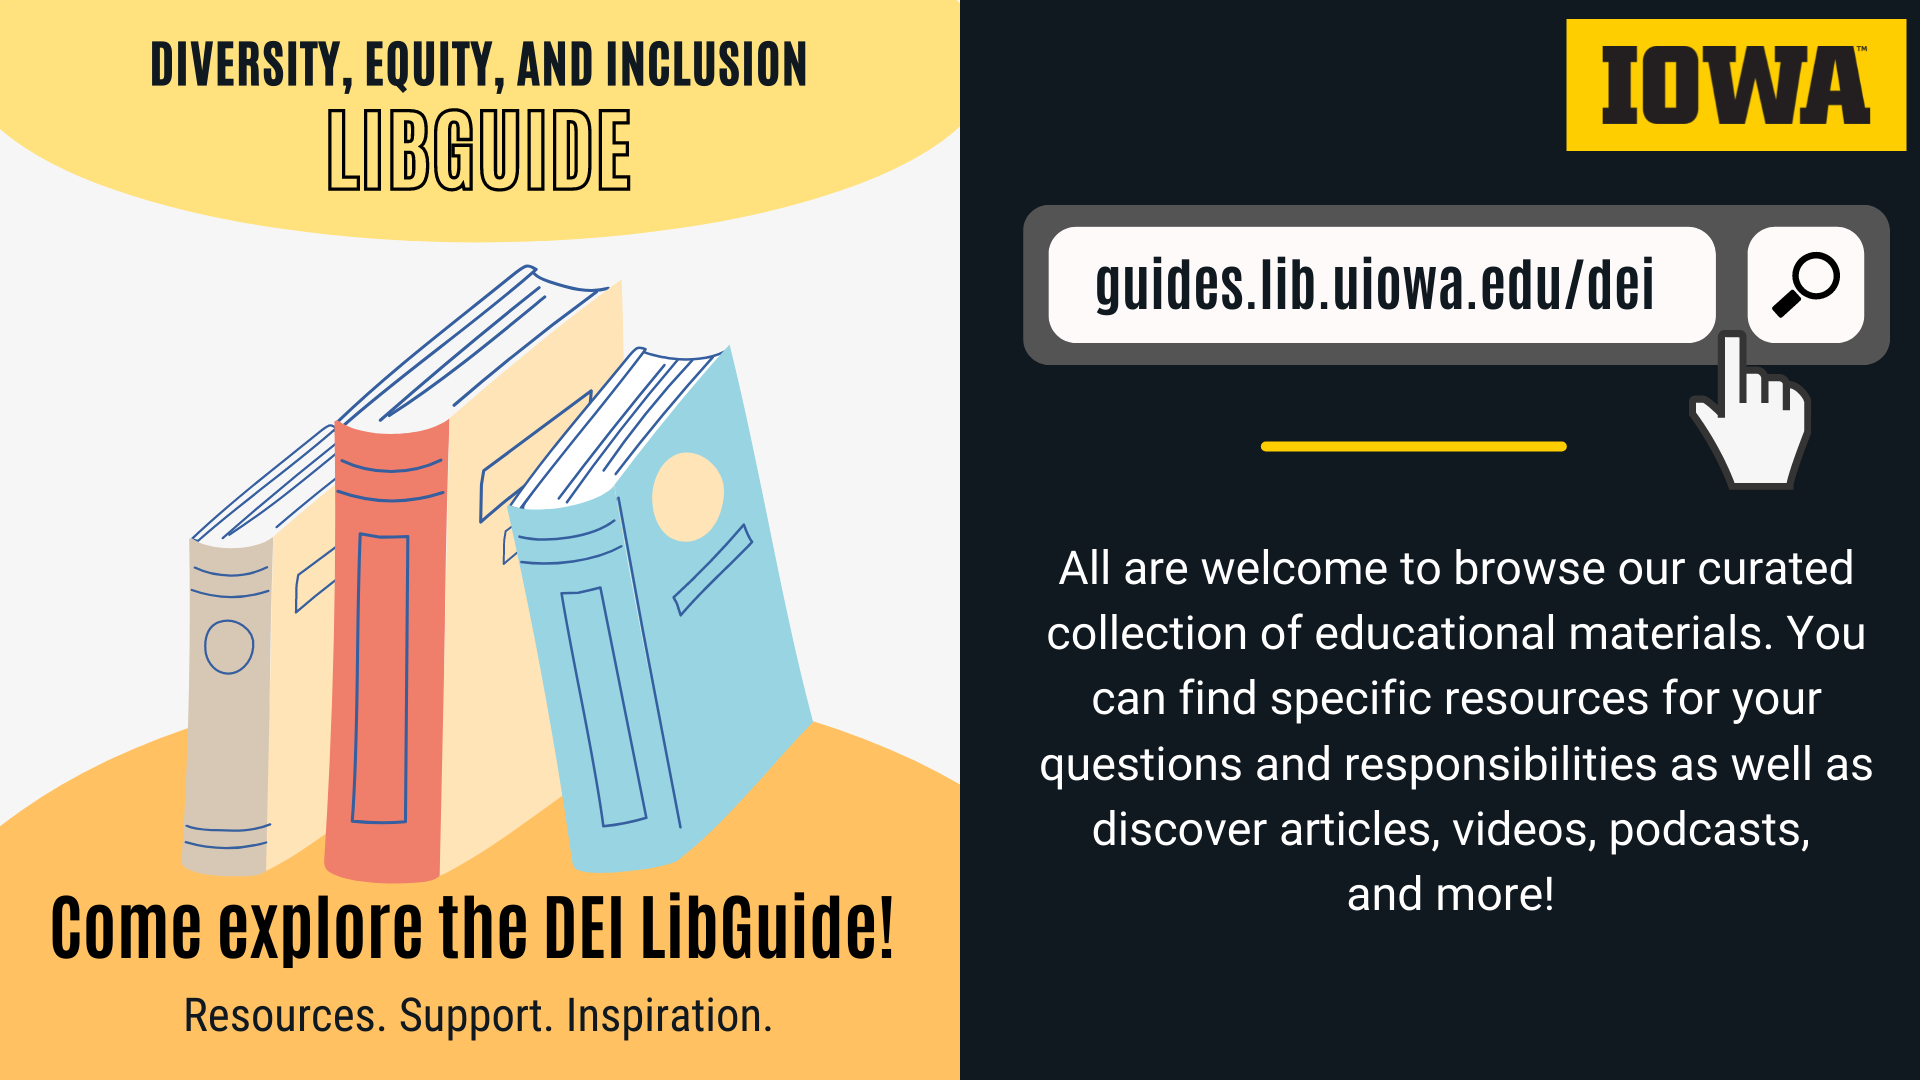 Diversity, Equity, and Inclusion LibGuide Come explore the DEI LibGuide! Resources. Support. Inspiration.   Guides.lib.uiowa.edu/dei   All are welcome to browse our curated collection of educational materials. You can find specific resources for your questions and responsibilities as well as discover articles, videos, podcasts, and more! 